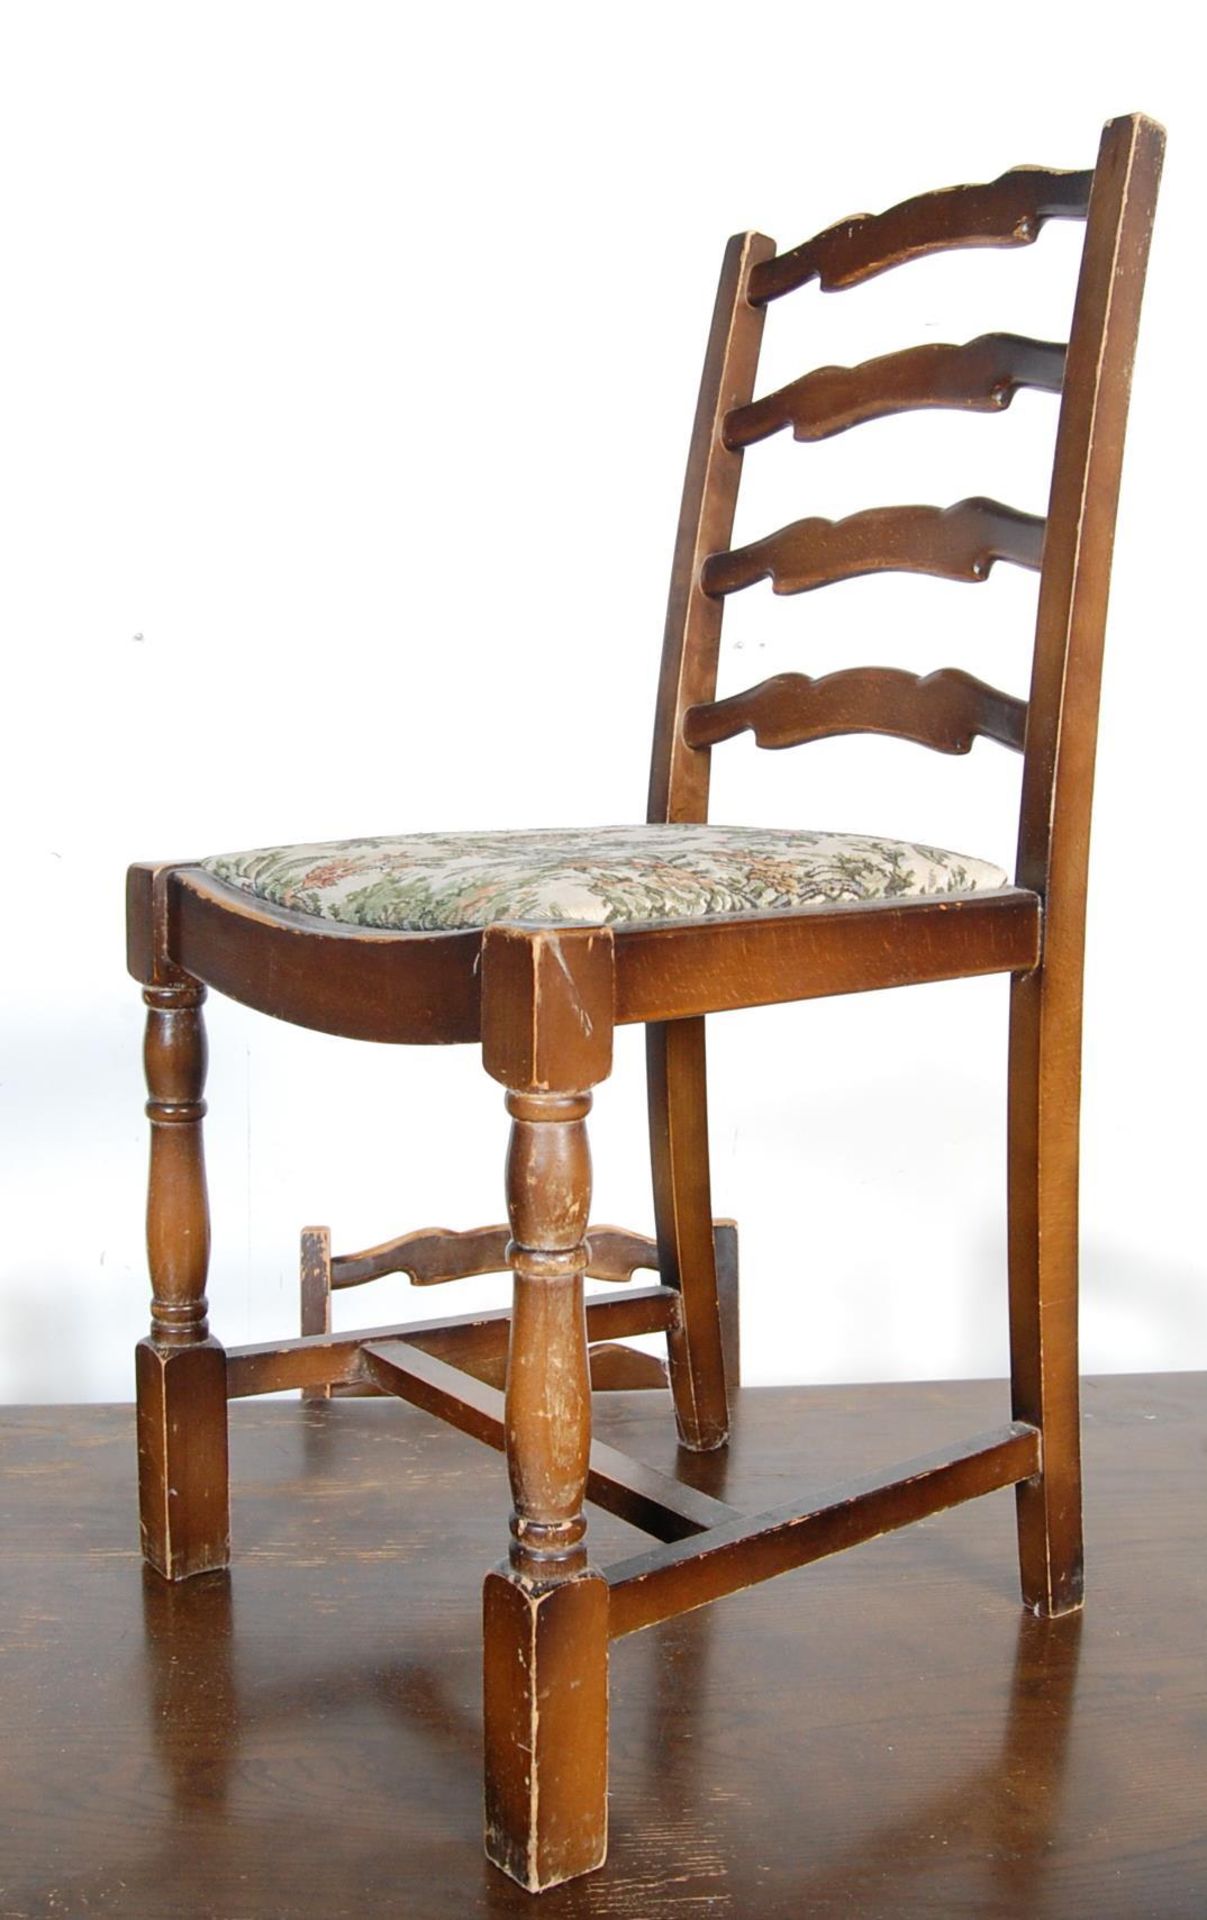 RETRO VINTAGE LATE 20TH CENTURY ERCOL STYLE DINING TABLE AND CHAIRS - Image 3 of 8